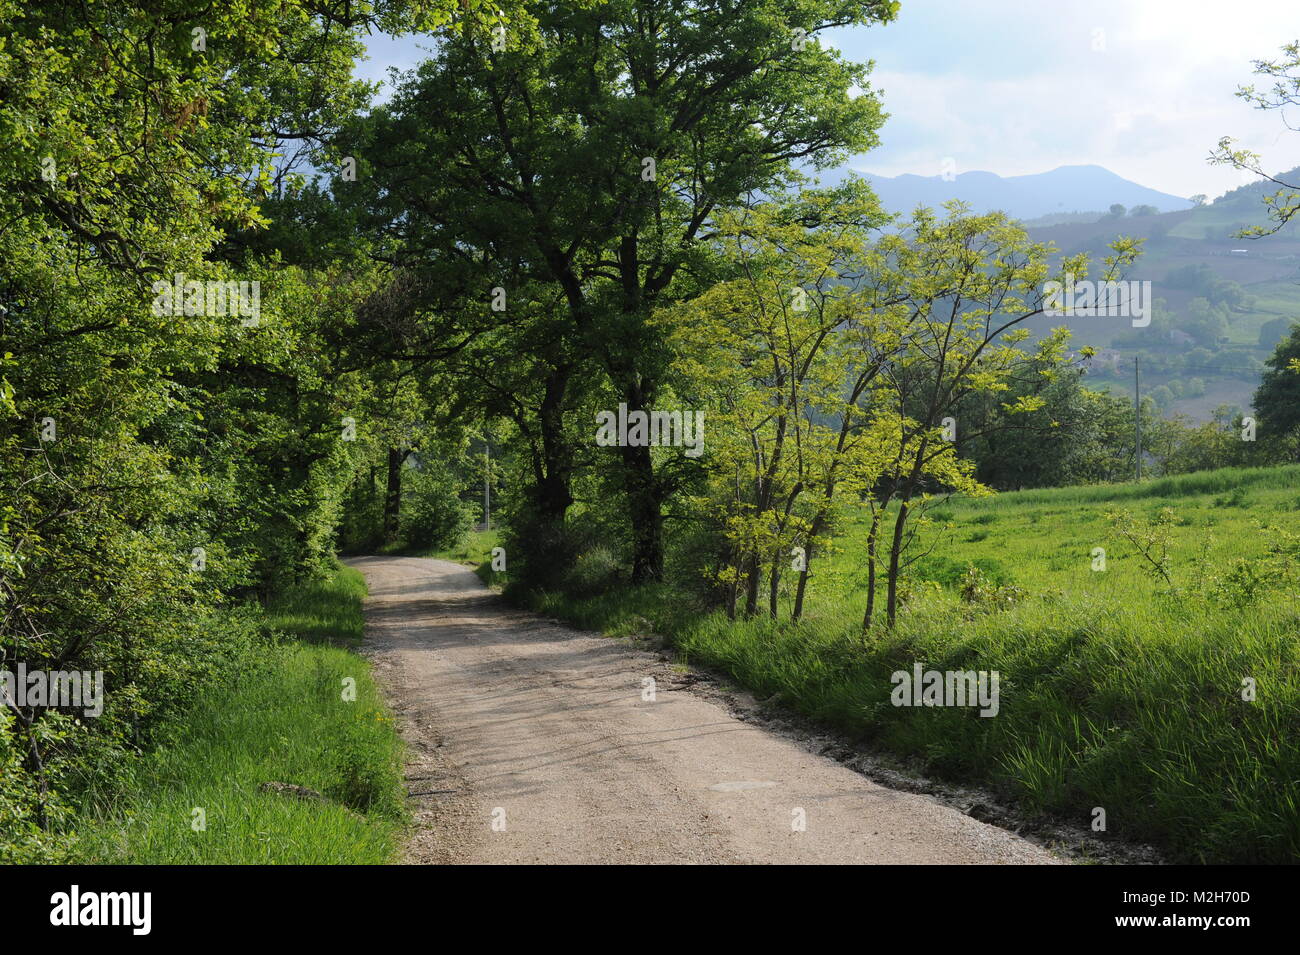 The road to San Ginesio, Le Marche, Italy Stock Photo